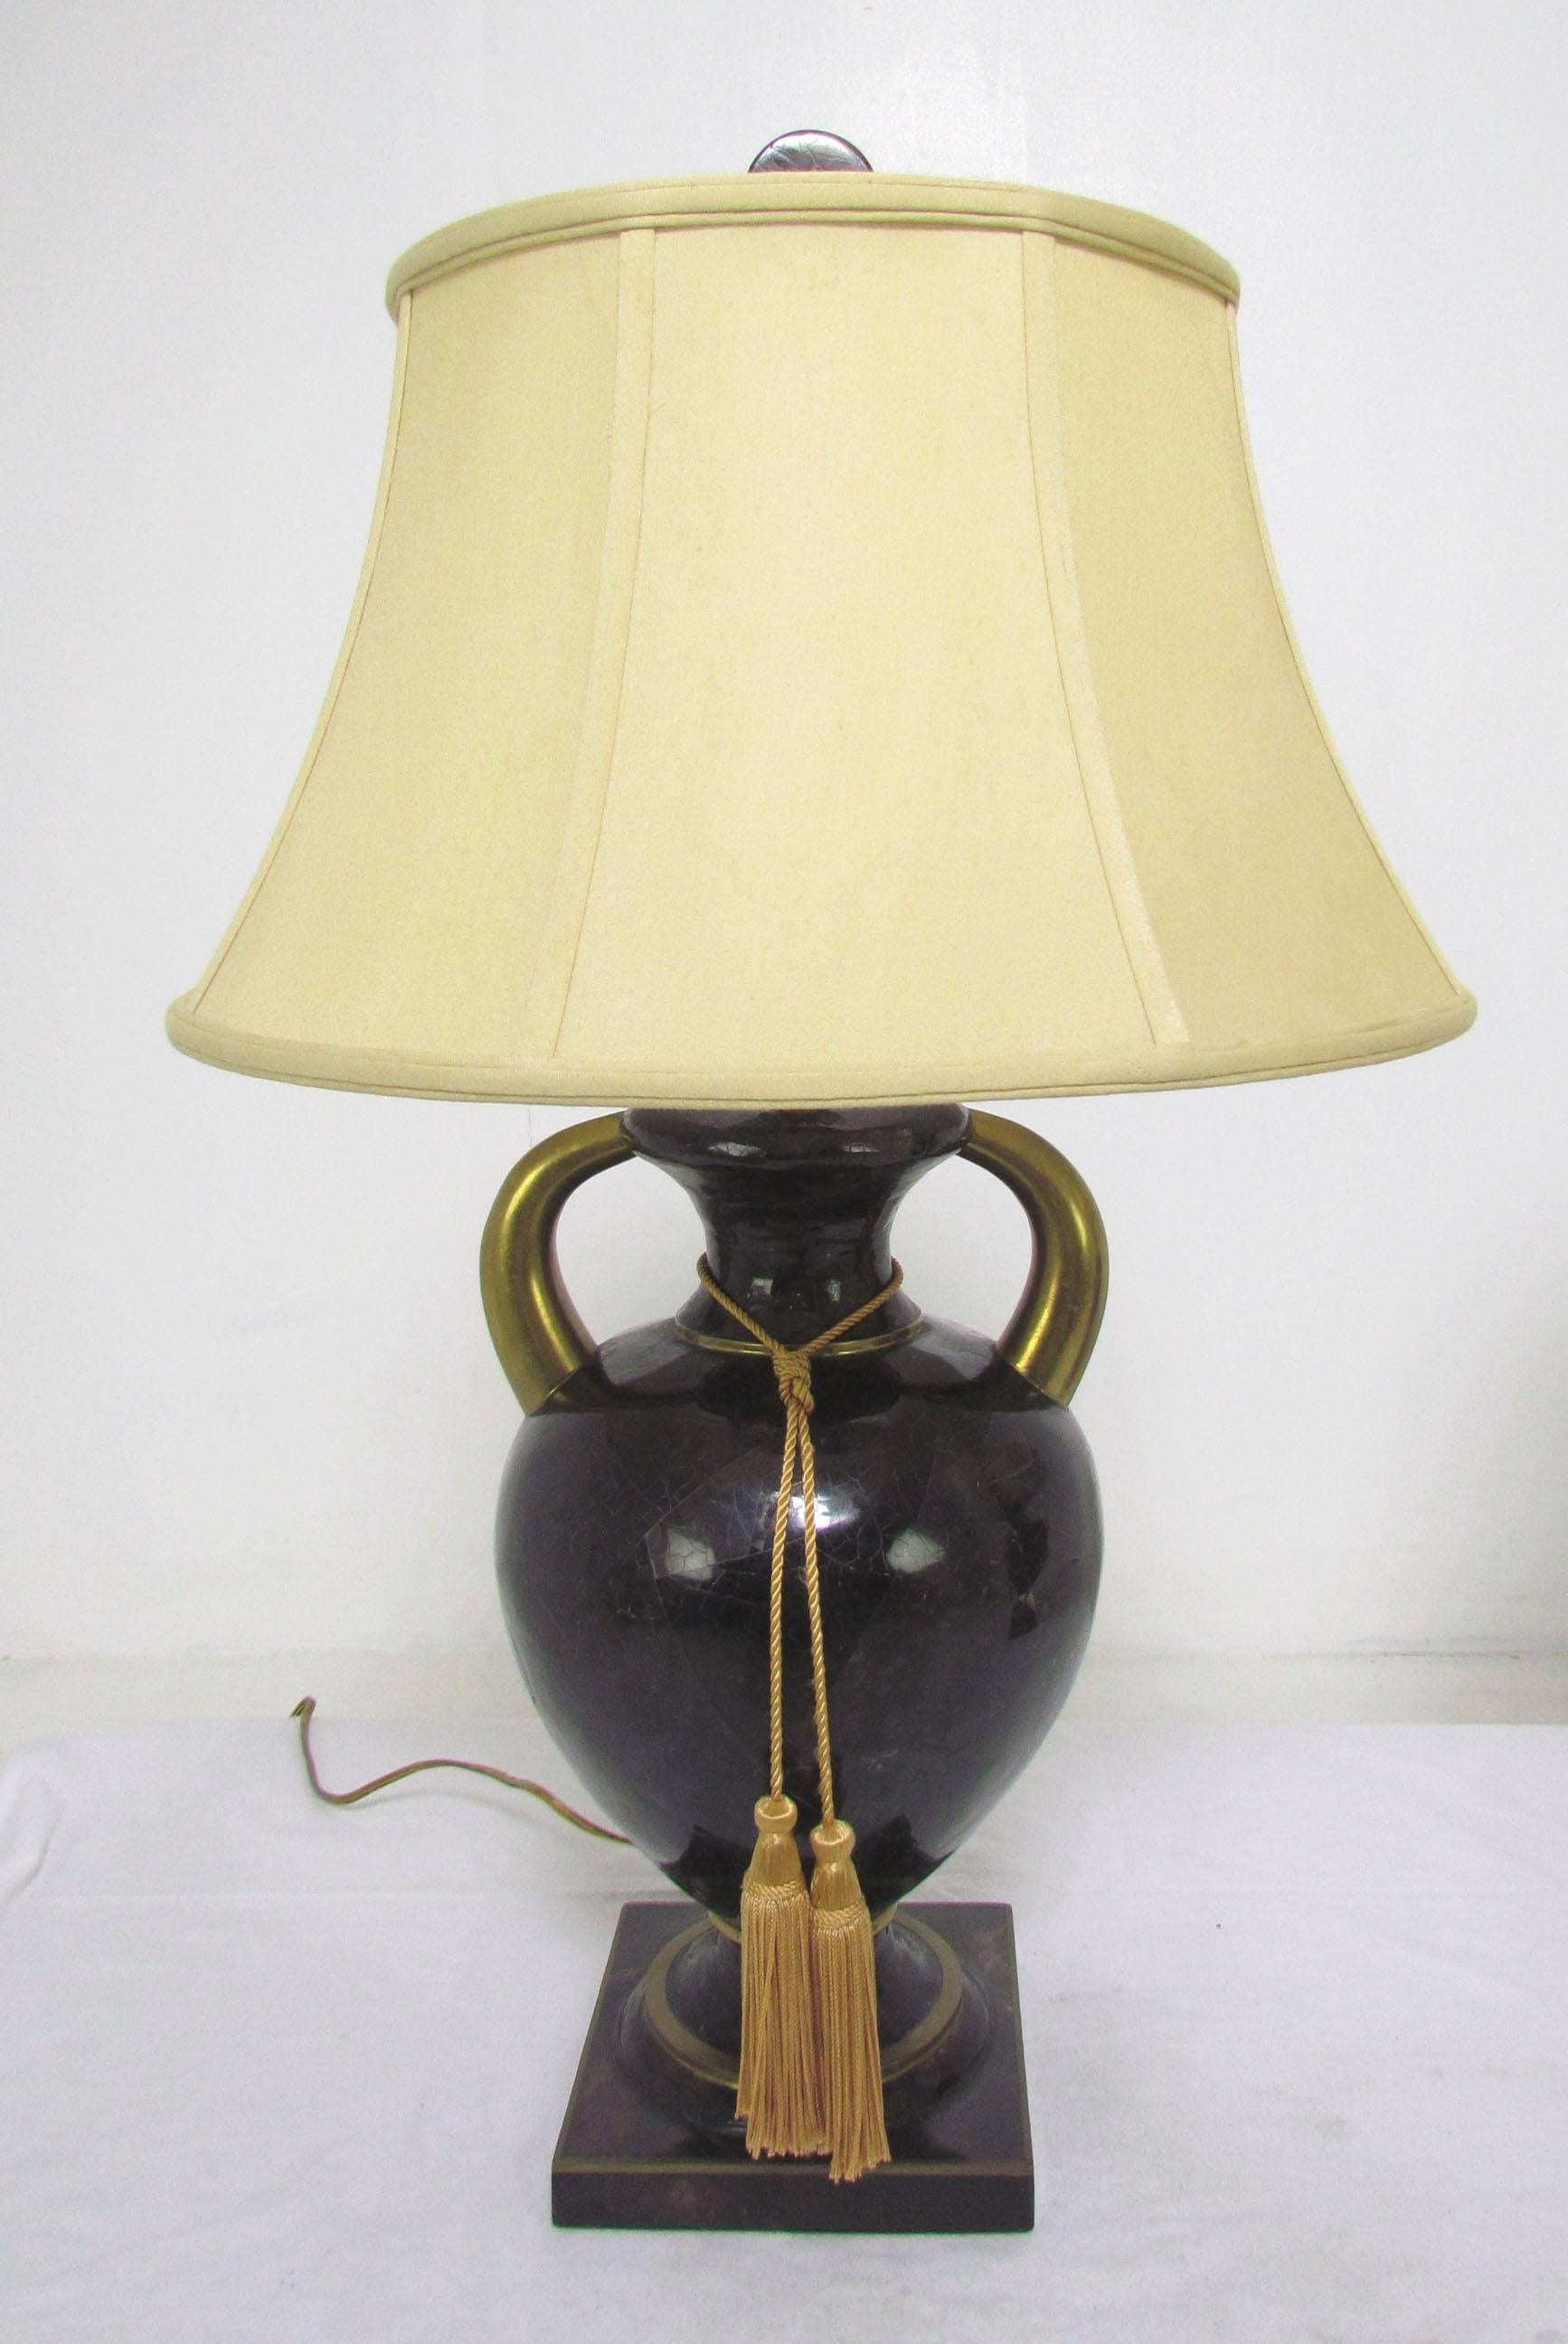 Pair of urn form table lamps in tessellated horn, with brass accents, by Maitland-Smith.

Measures: 28" high to top of finial, 8" diameter. Shades 17.5" diameter, 9.75" high.